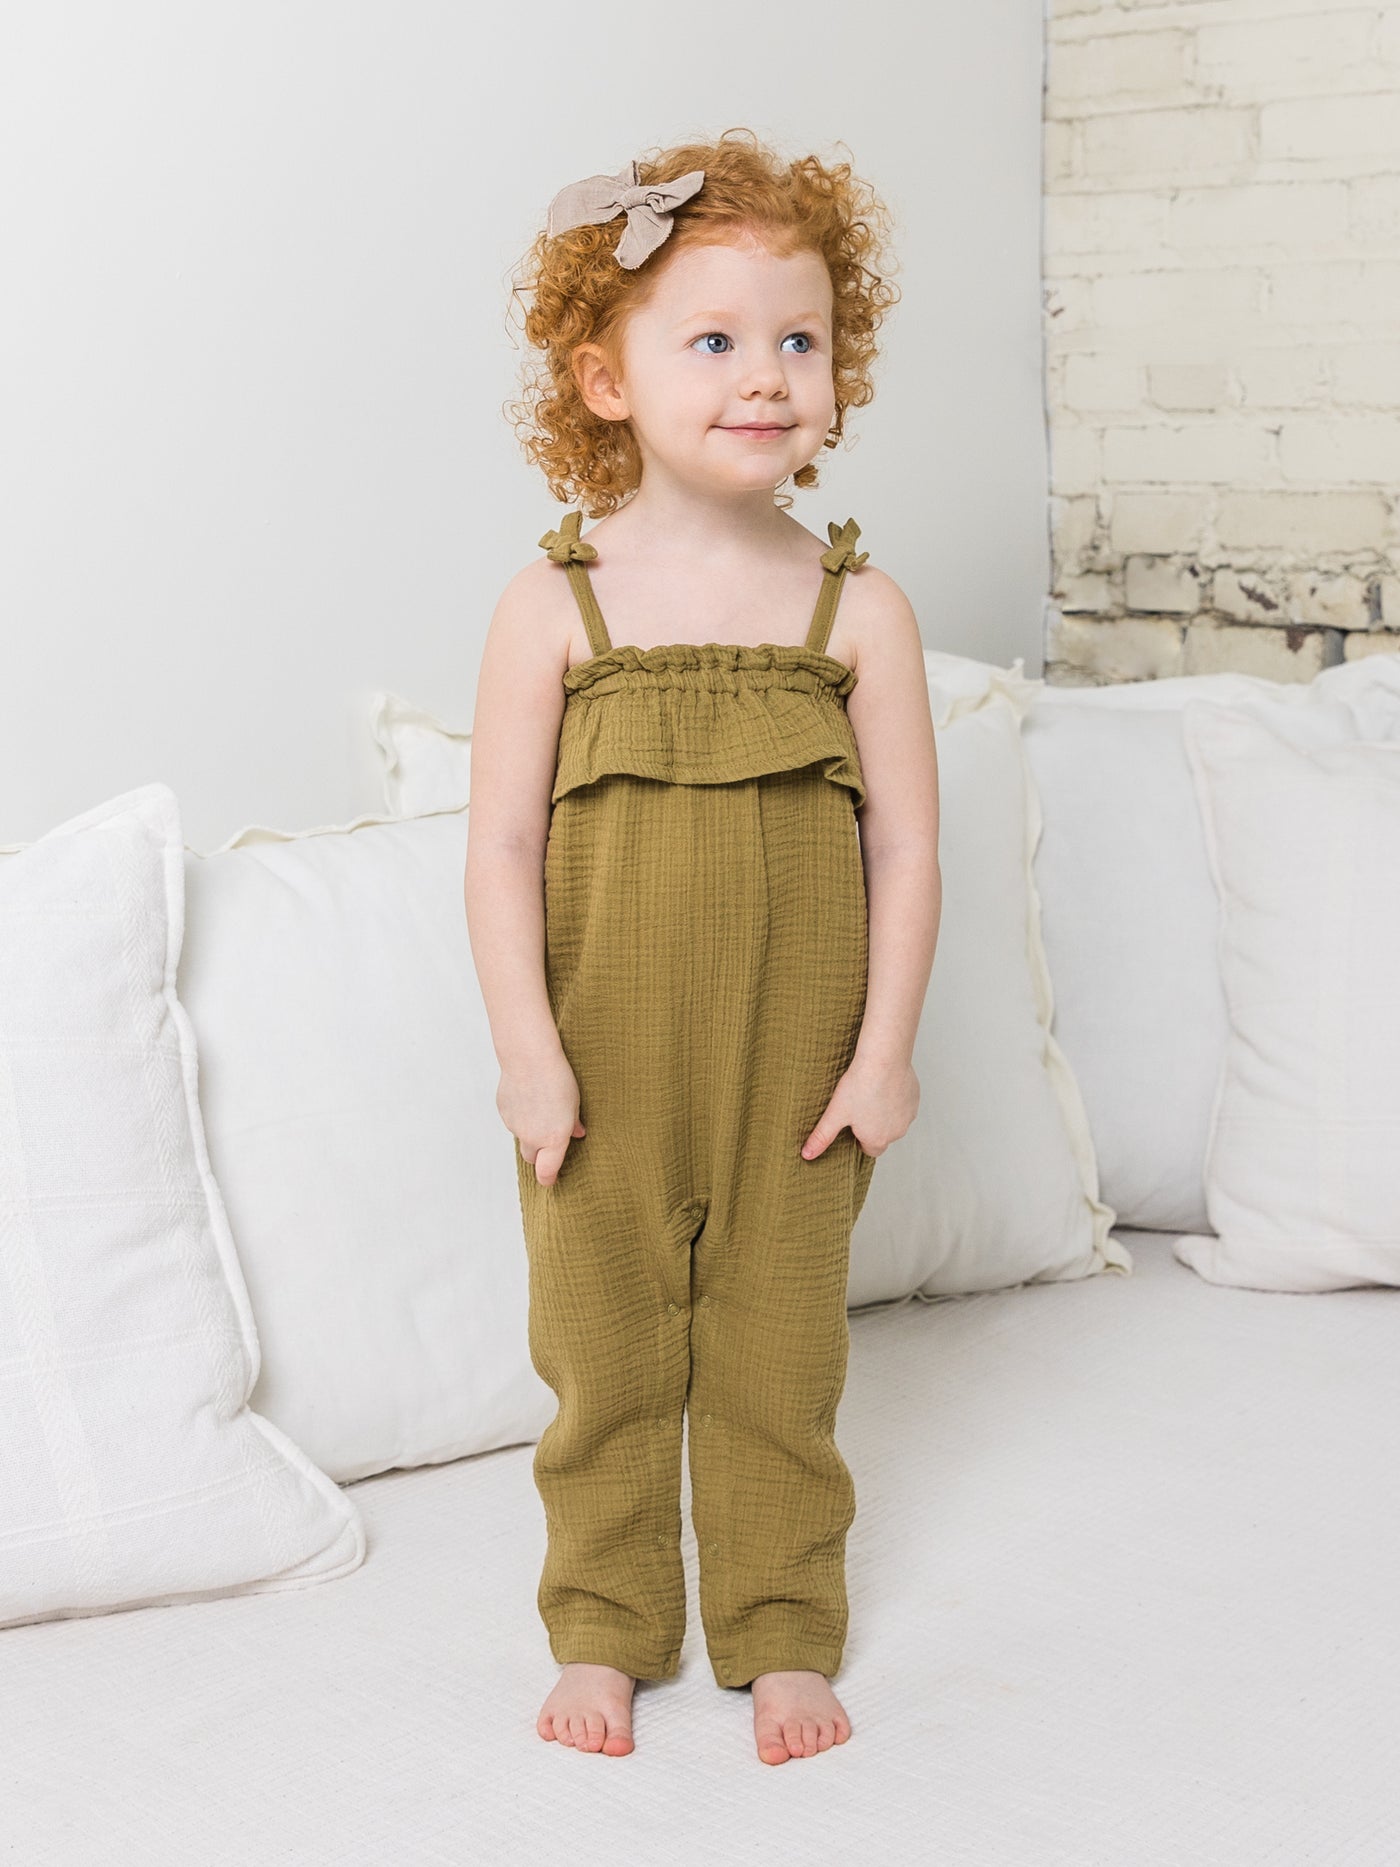 It's all in the delicate details! The Fiona Muslin Romper's has an elastic neckline on the ruffled top, with adorable faux bows on the romper's strap. Nickel-free snaps line the leg opening for simple dressing. 100% organic cotton muslin